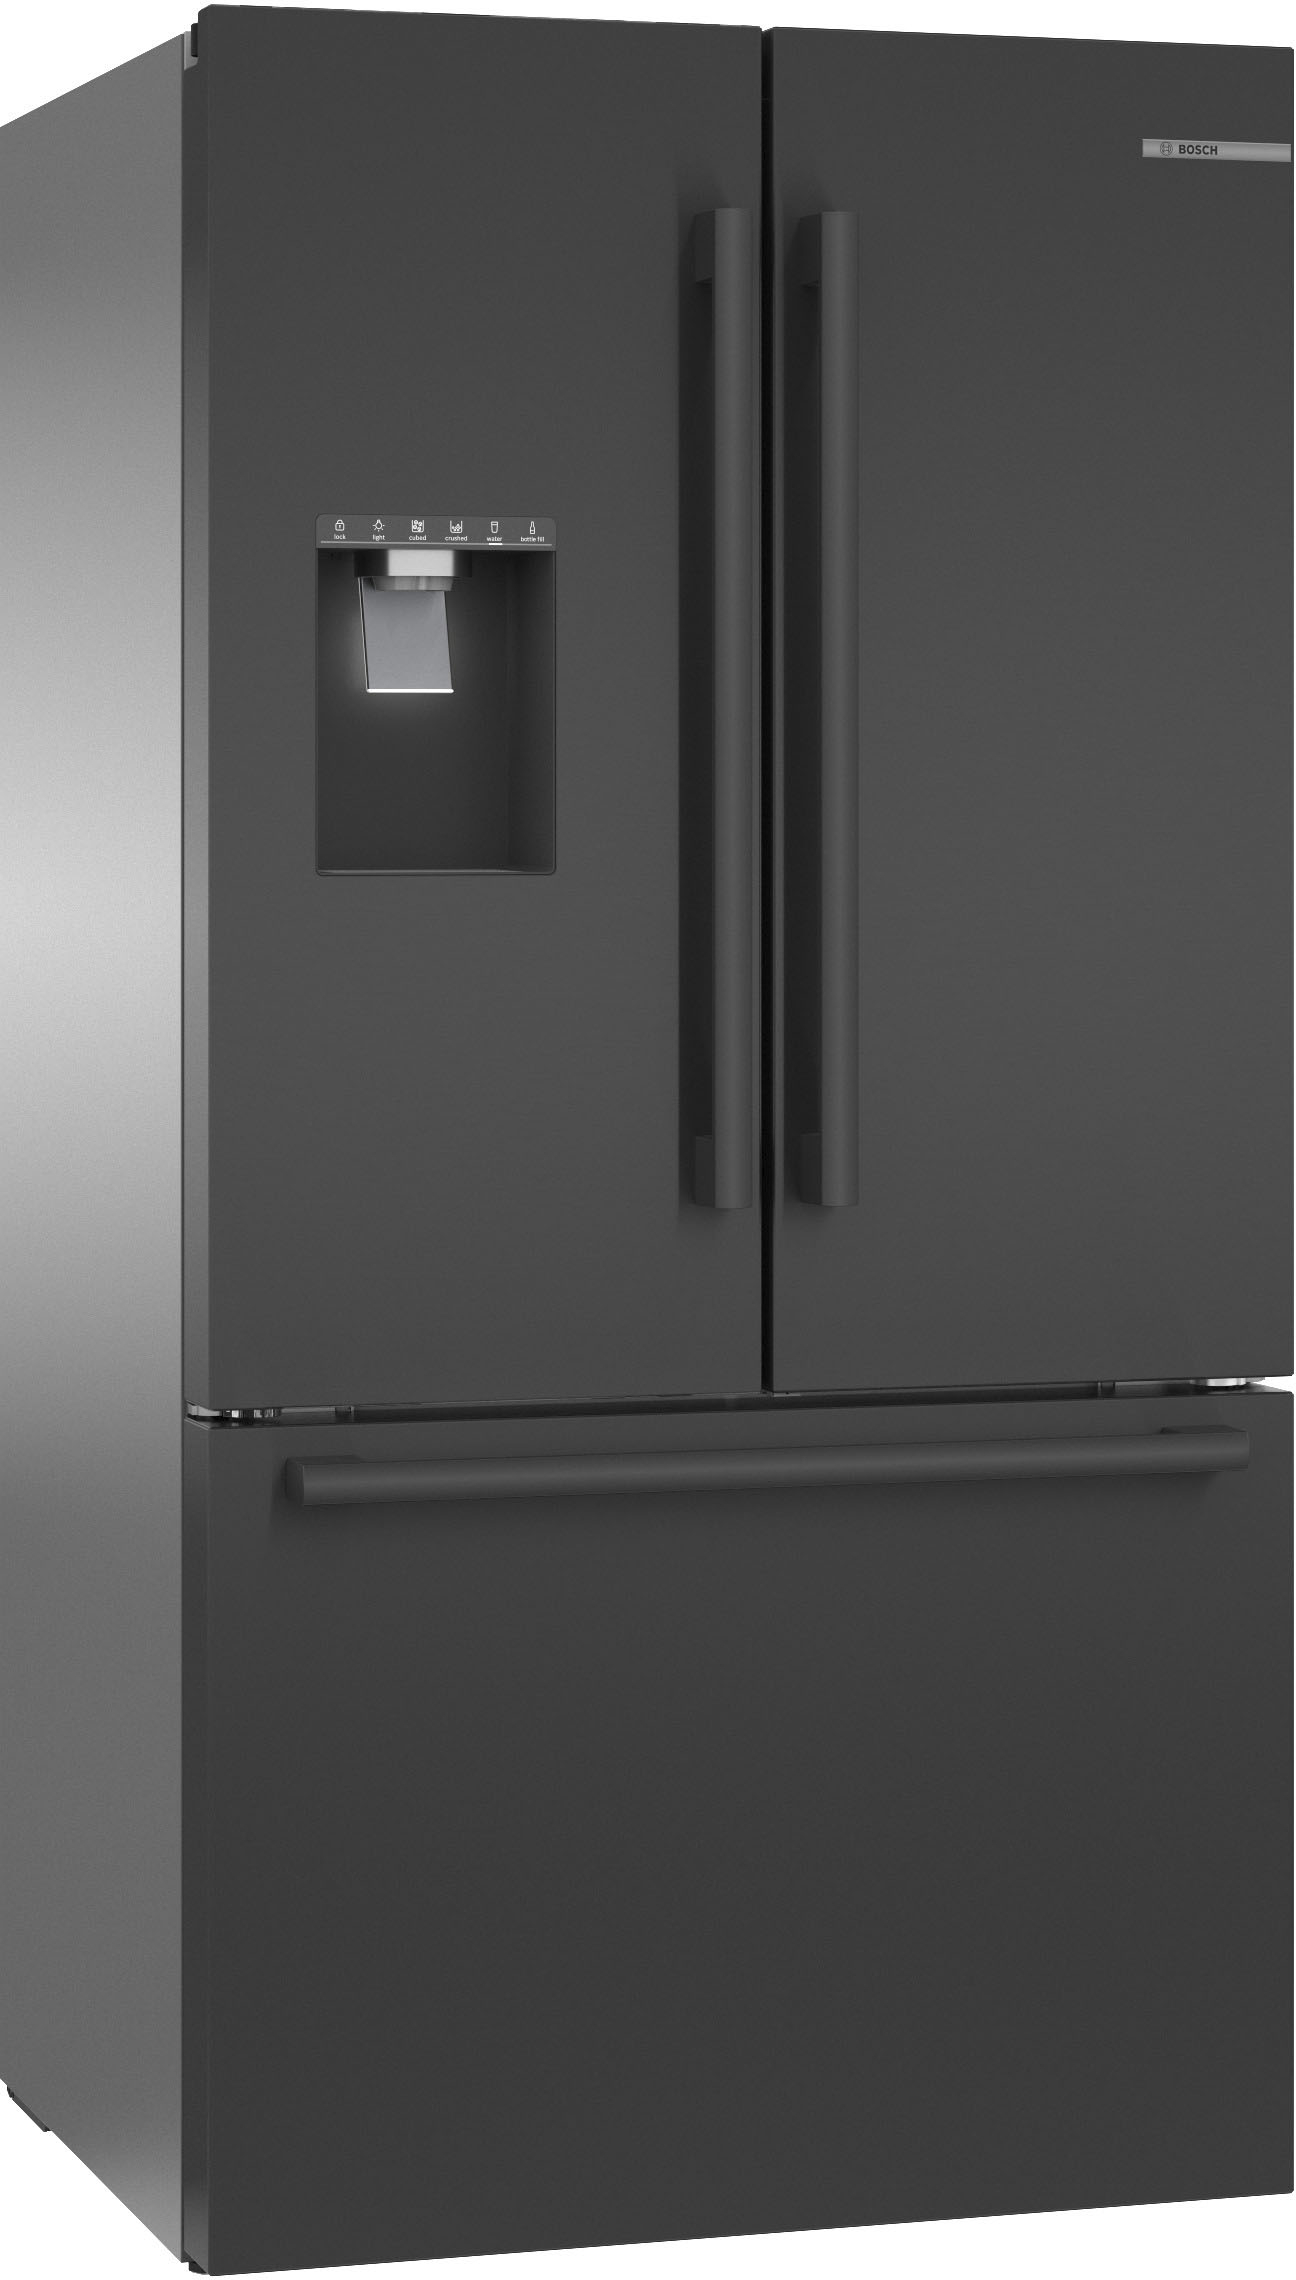 Angle View: KitchenAid - 21.9 Cu. Ft. French Door Counter-Depth Refrigerator - Black Stainless Steel